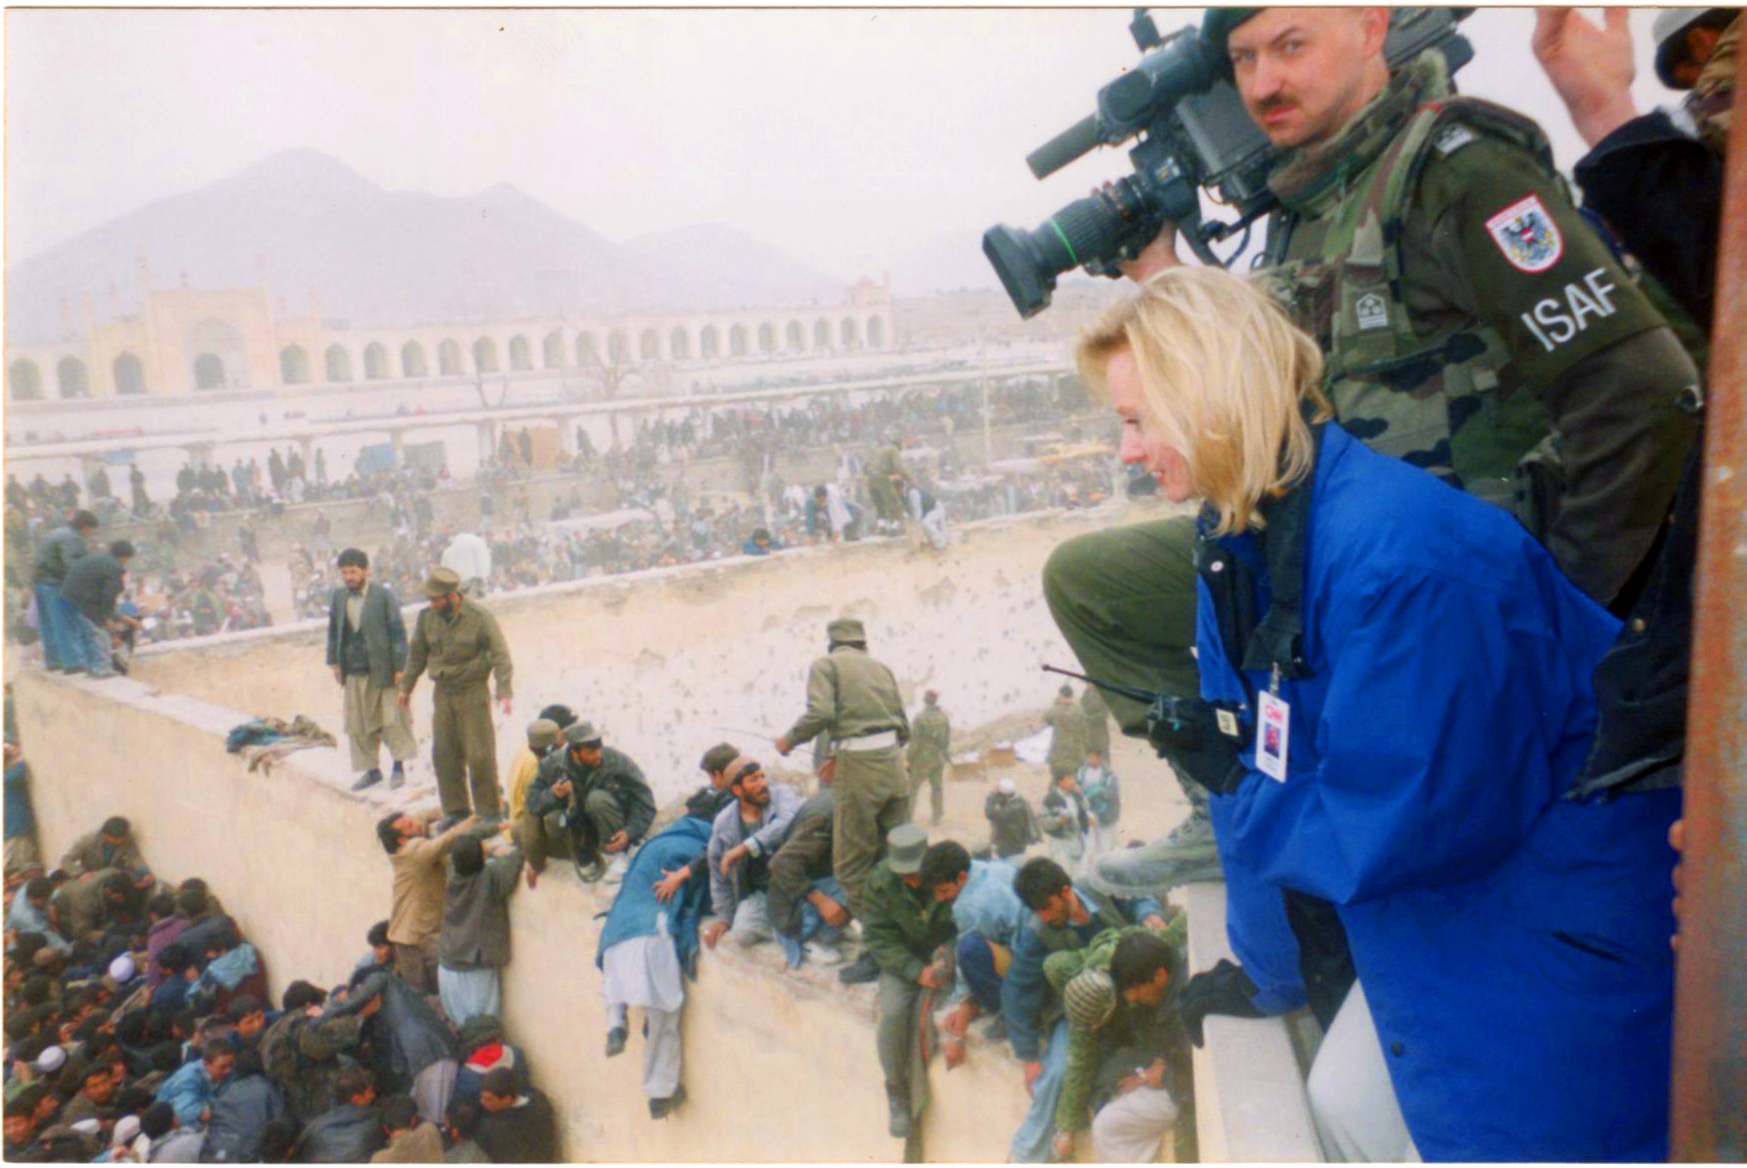 War Reporter Alex Quade for CNN in Kabul, Afghanistan during riot. Quade and an ISAF soldier found high ground for safety for Quade to report, while maintaining radio contact with CNN crew in other location.